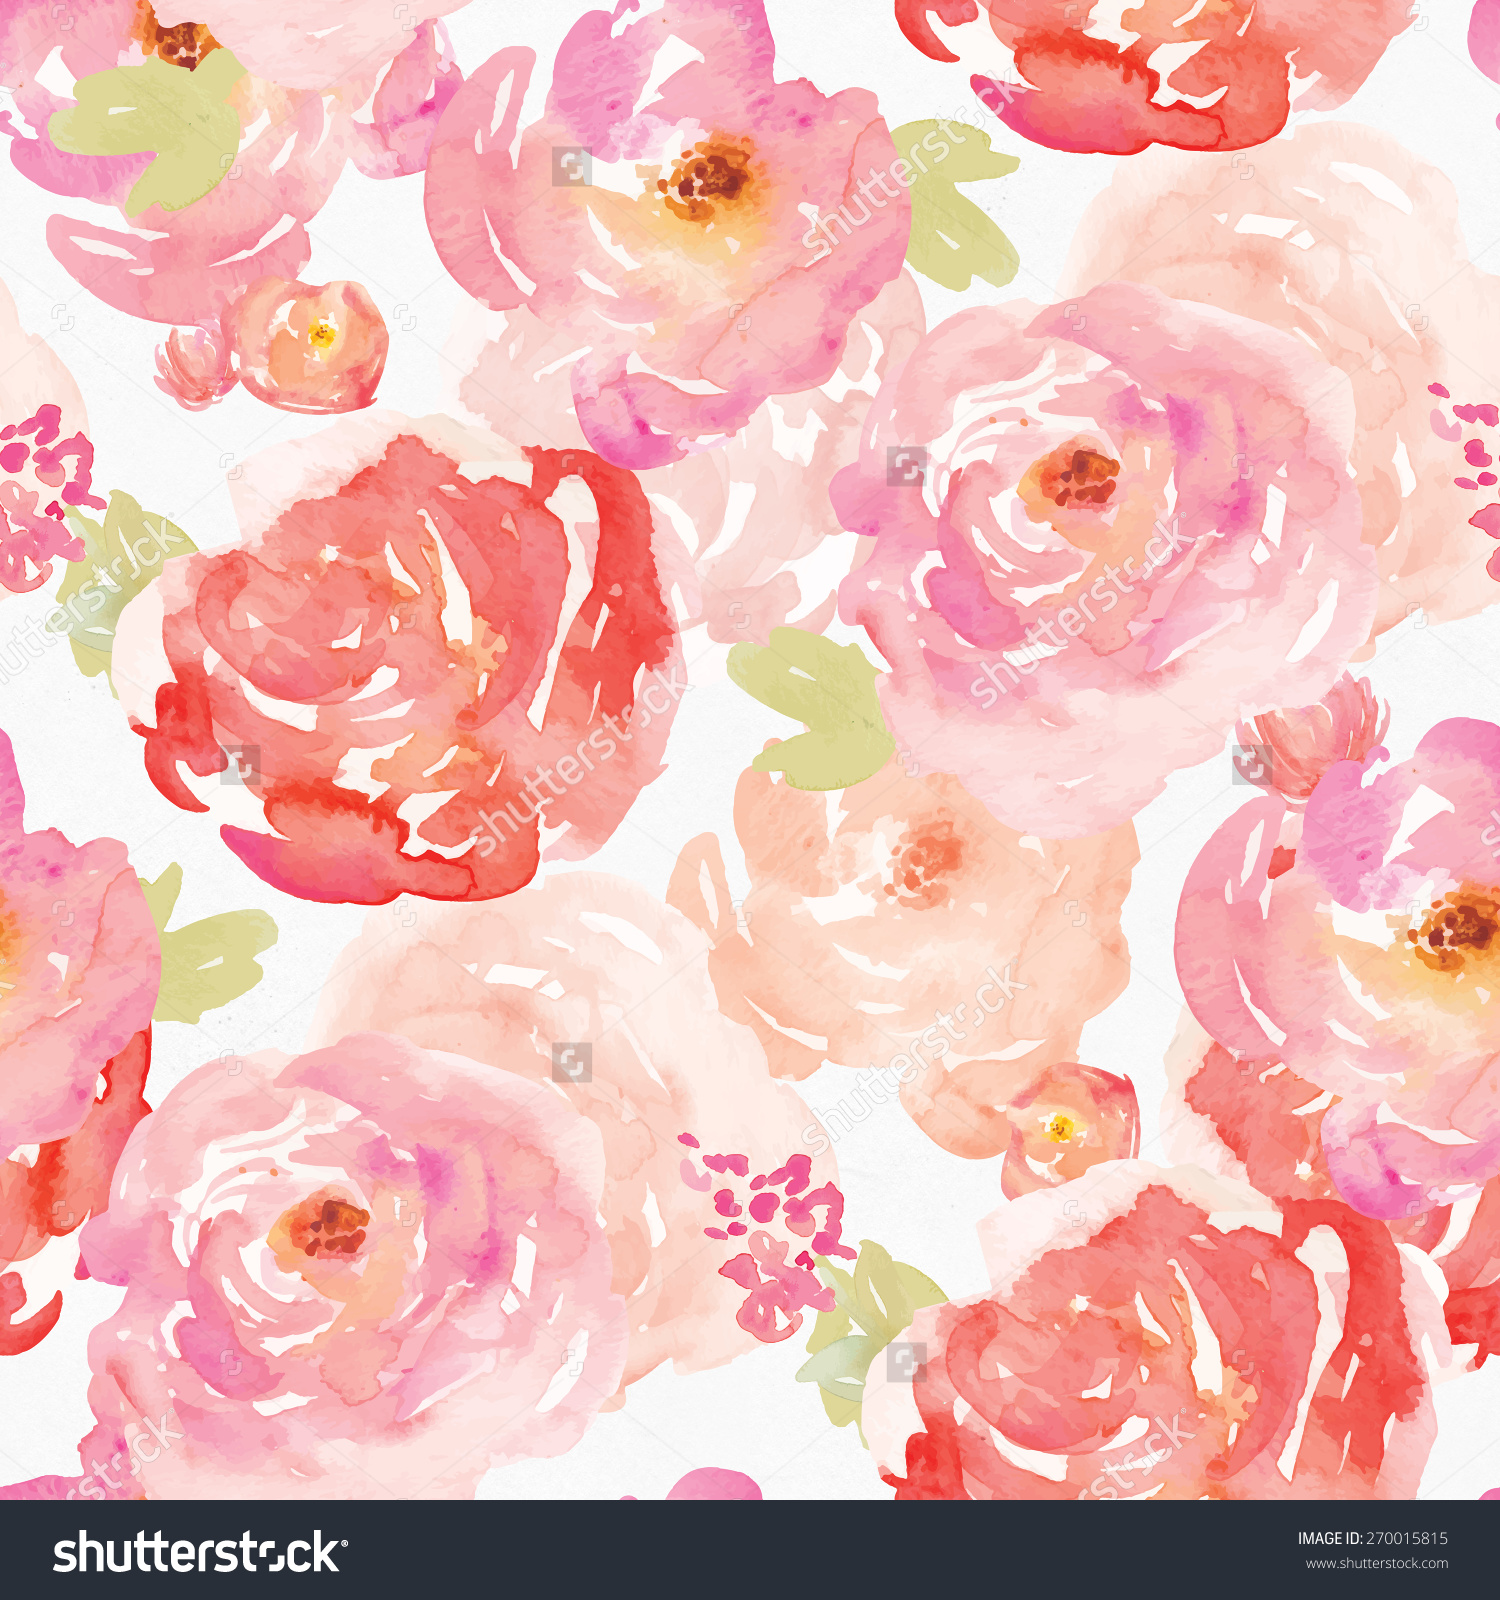 Floral background pattern photo